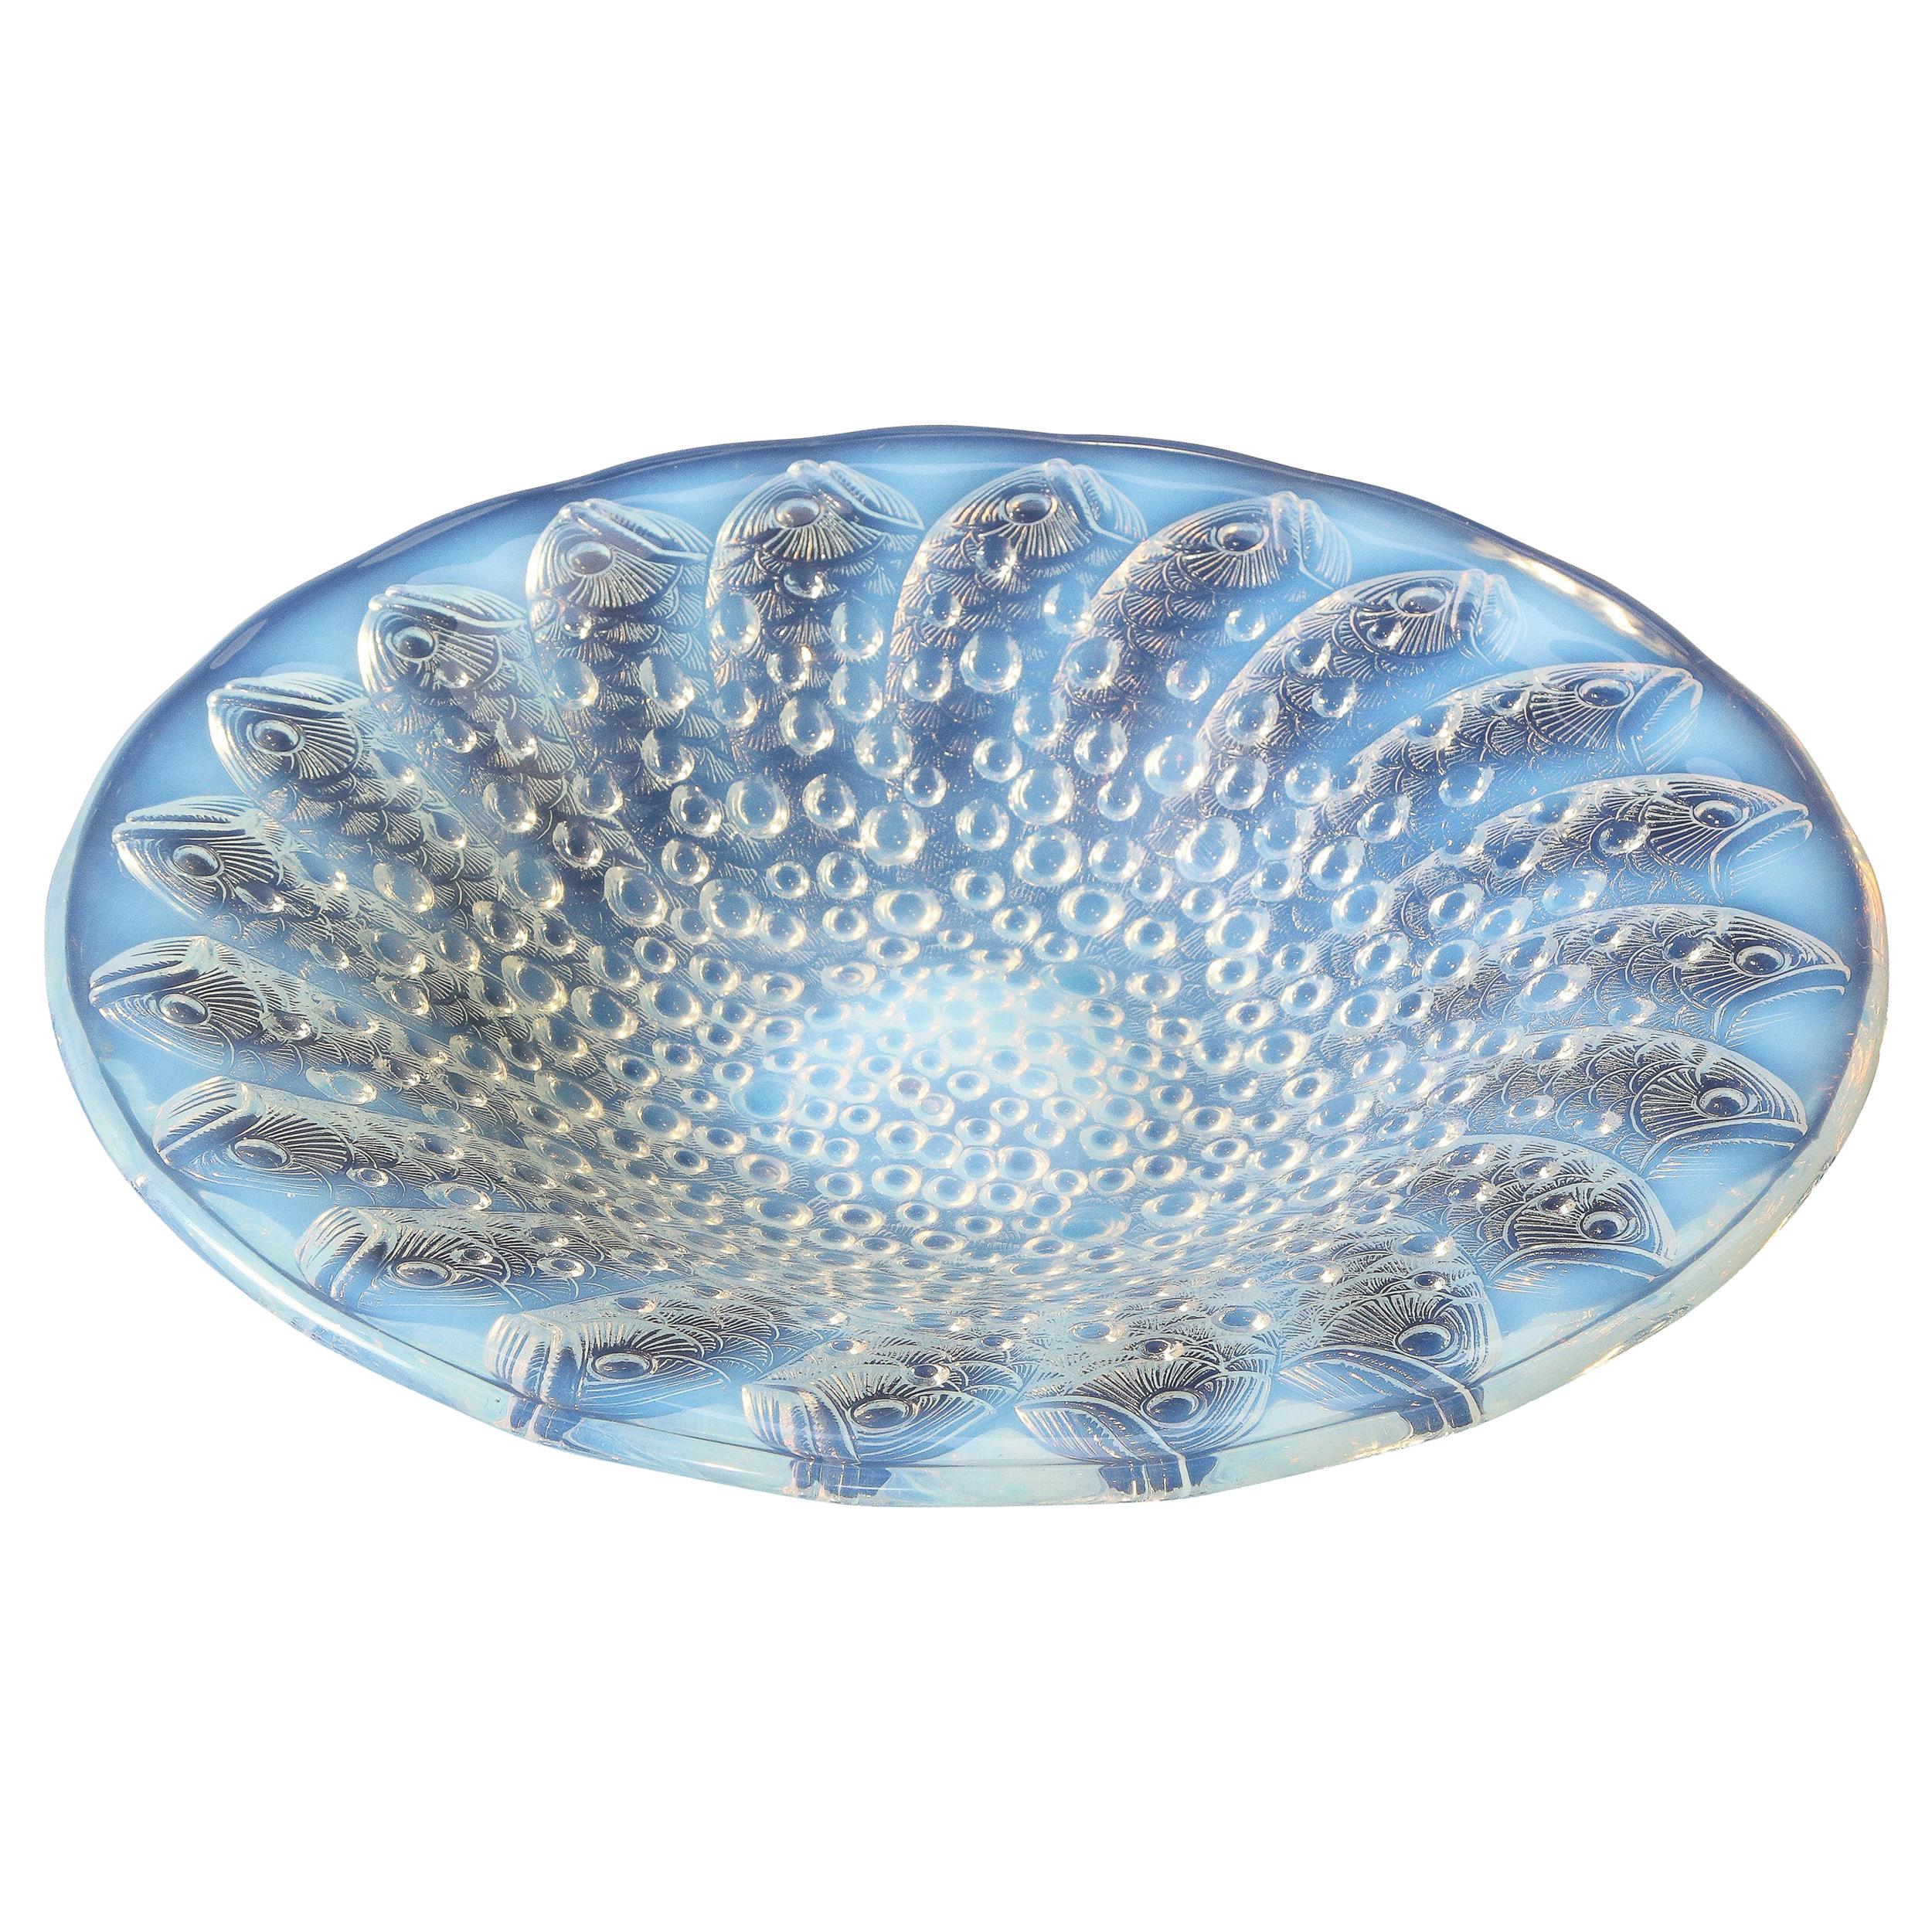 Art Deco Opalescent Glass Center Bowl with Repeating Fish Motif by Lalique